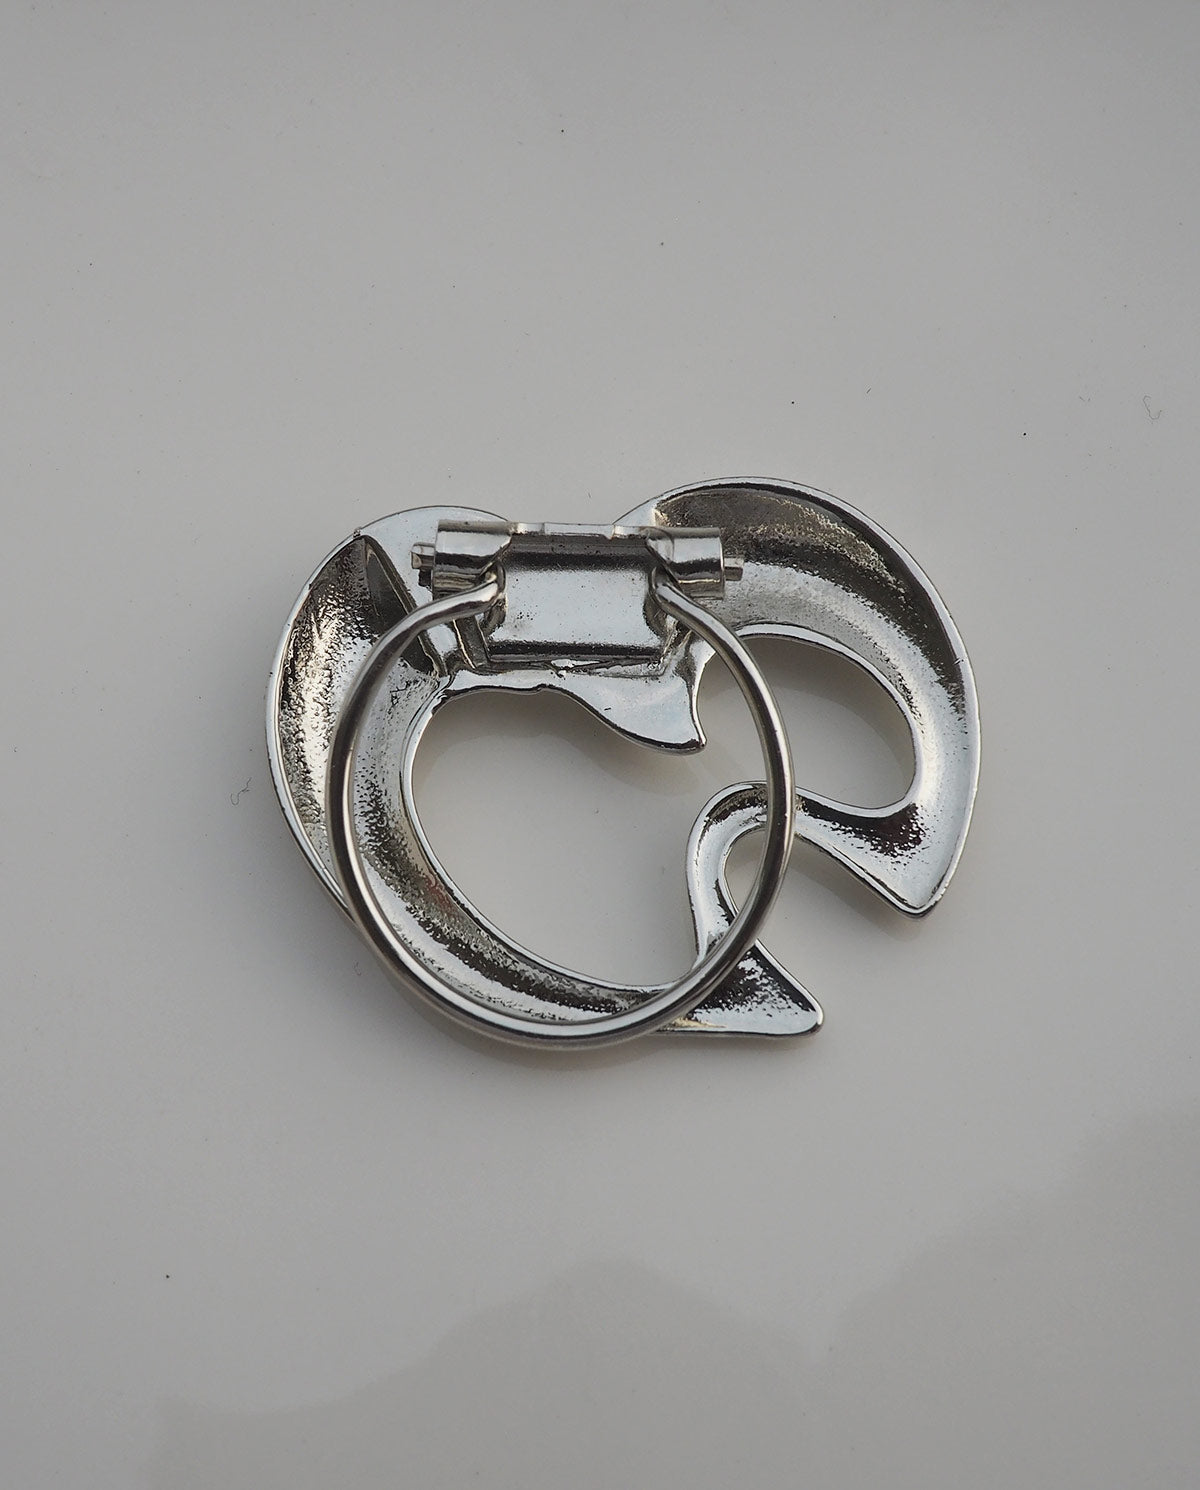 Abstract Shaped Silvertone Scarf Clip